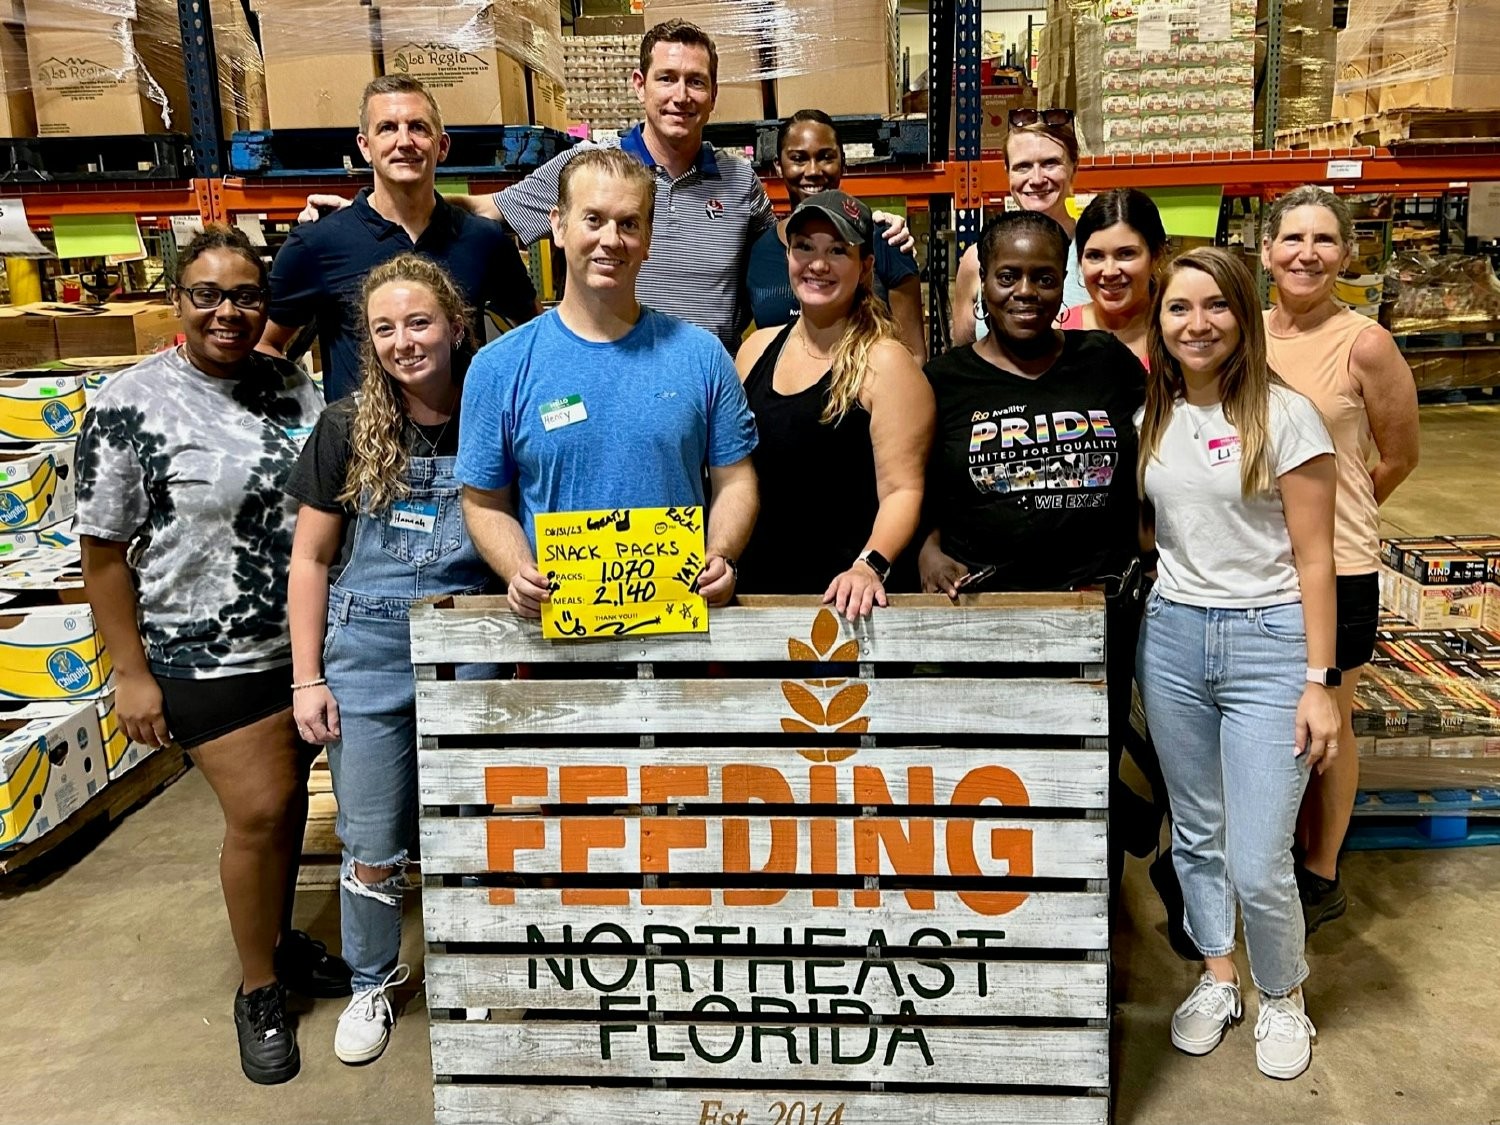 Availity Finance team assembling snack packs at Feeding Northeast Florida's Warehouse to help Jacksonville students.